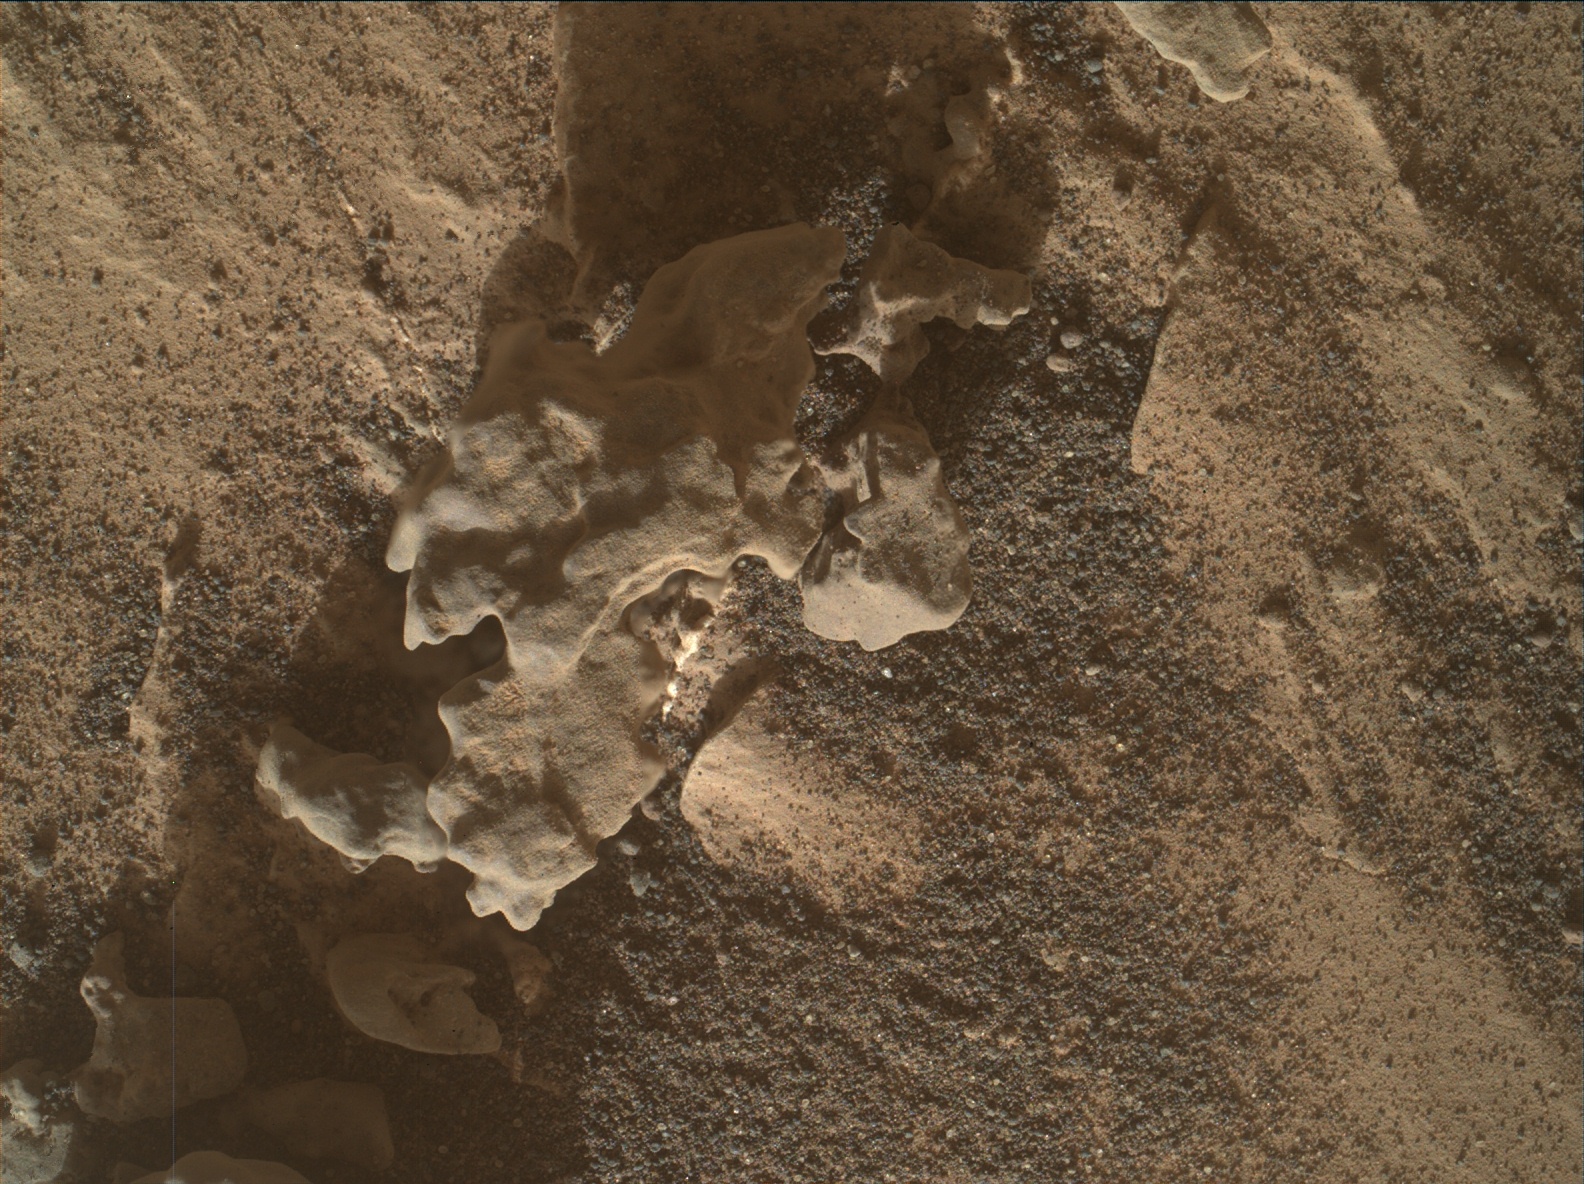 Nasa's Mars rover Curiosity acquired this image using its Mars Hand Lens Imager (MAHLI) on Sol 3145